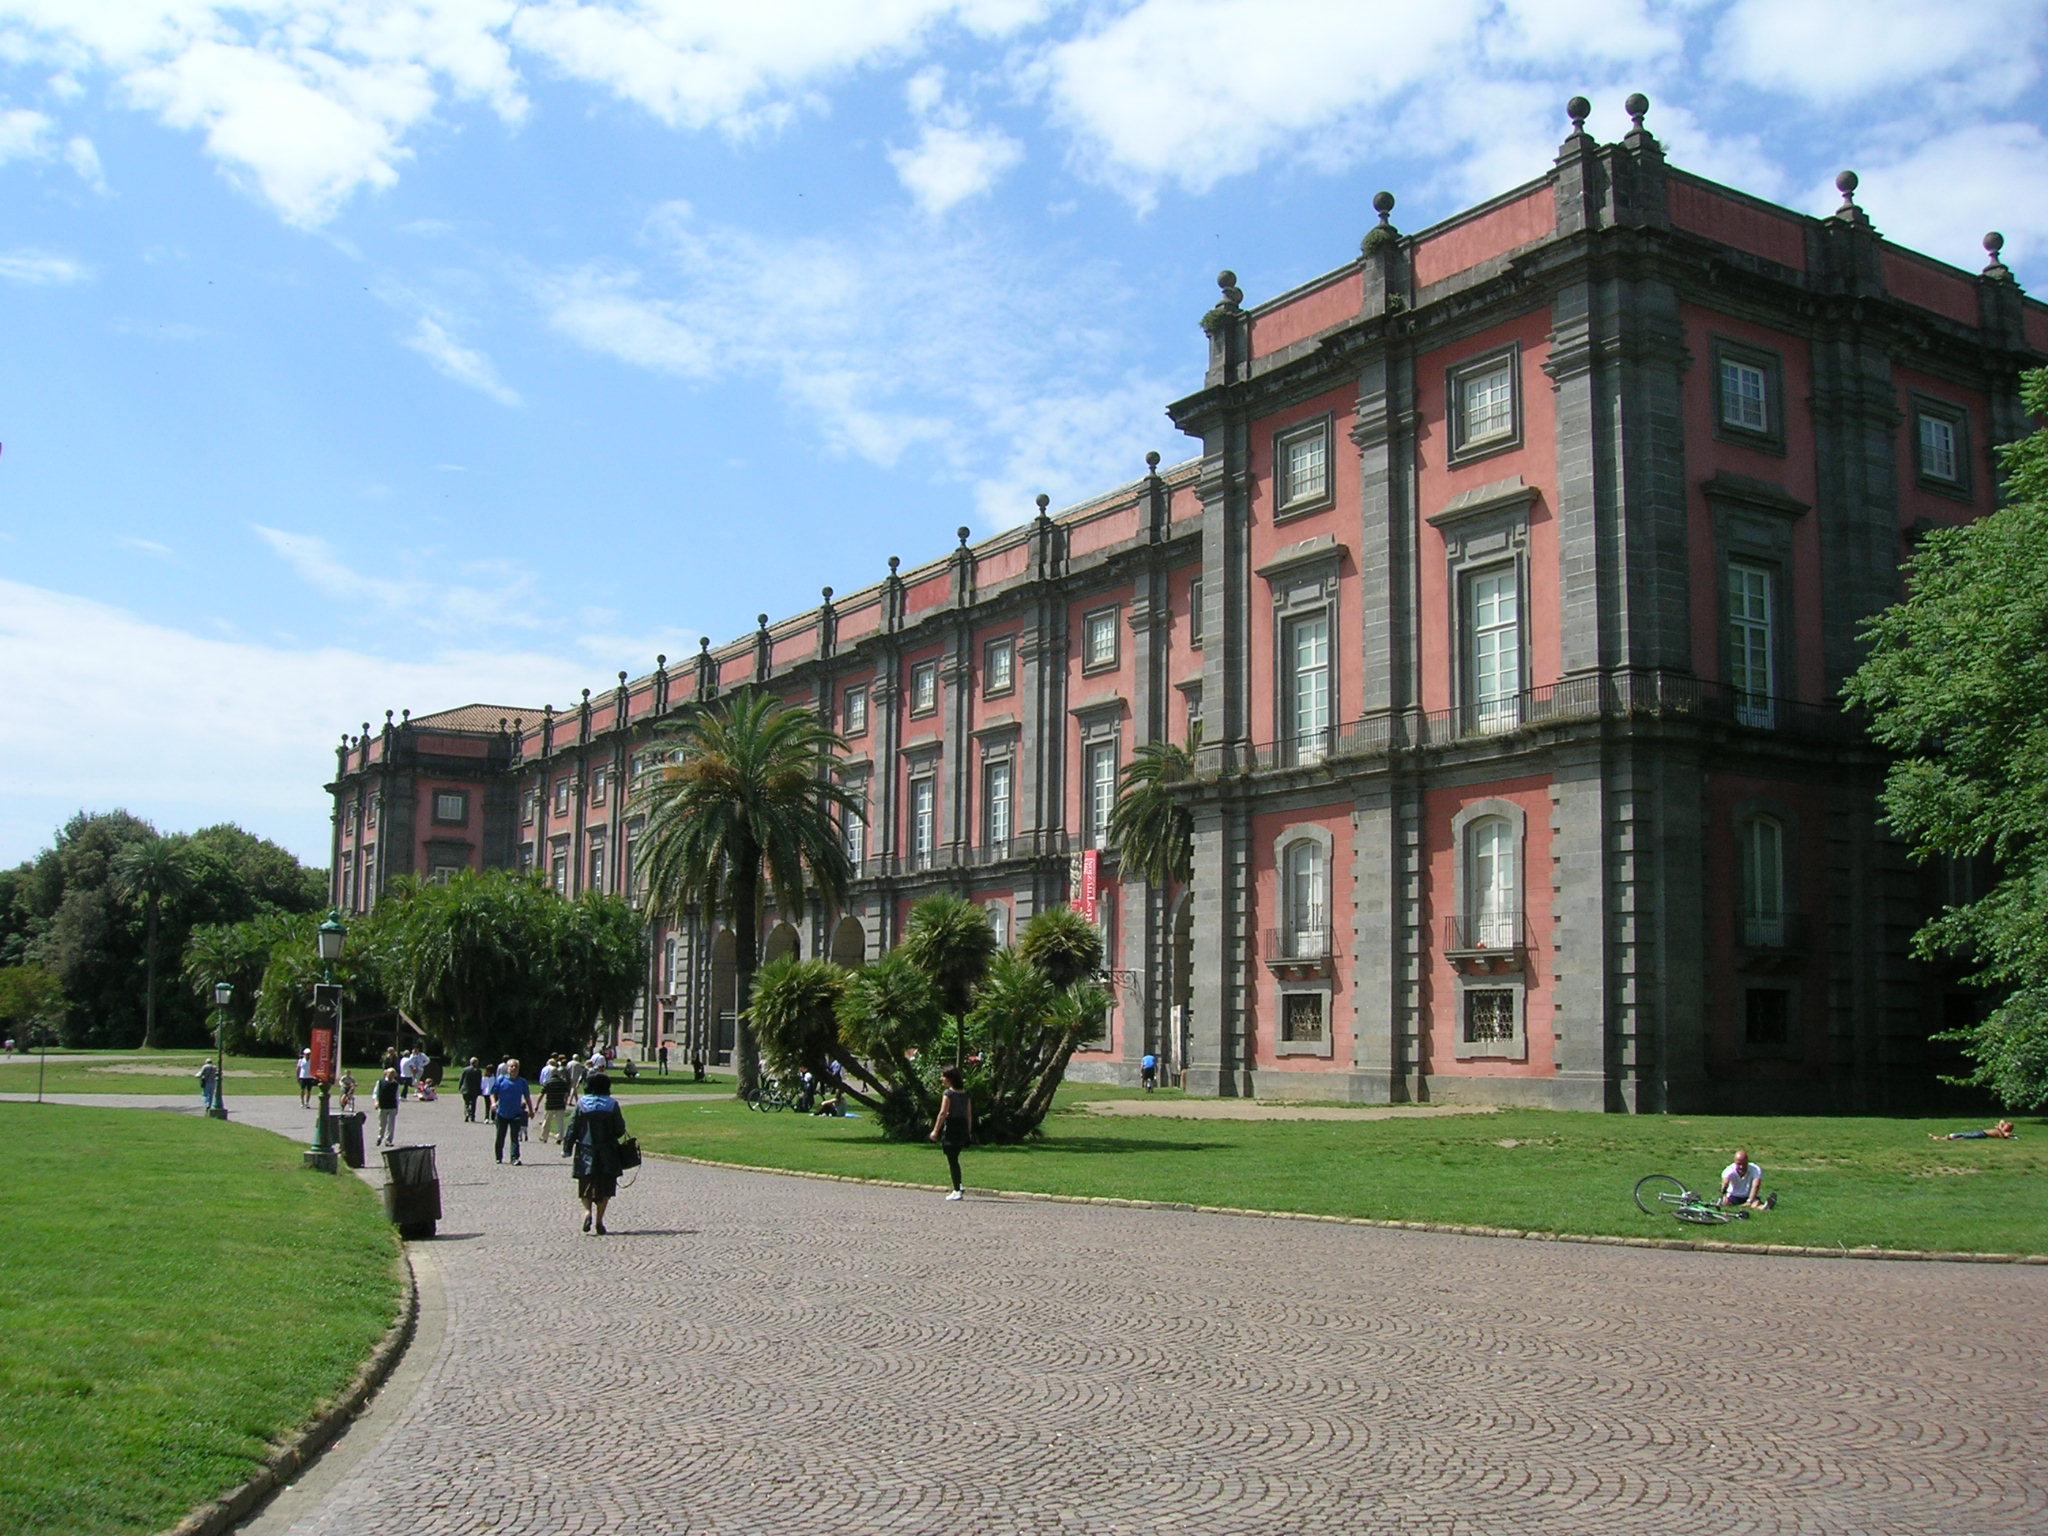 Cover image of this place Museo di Capodimonte